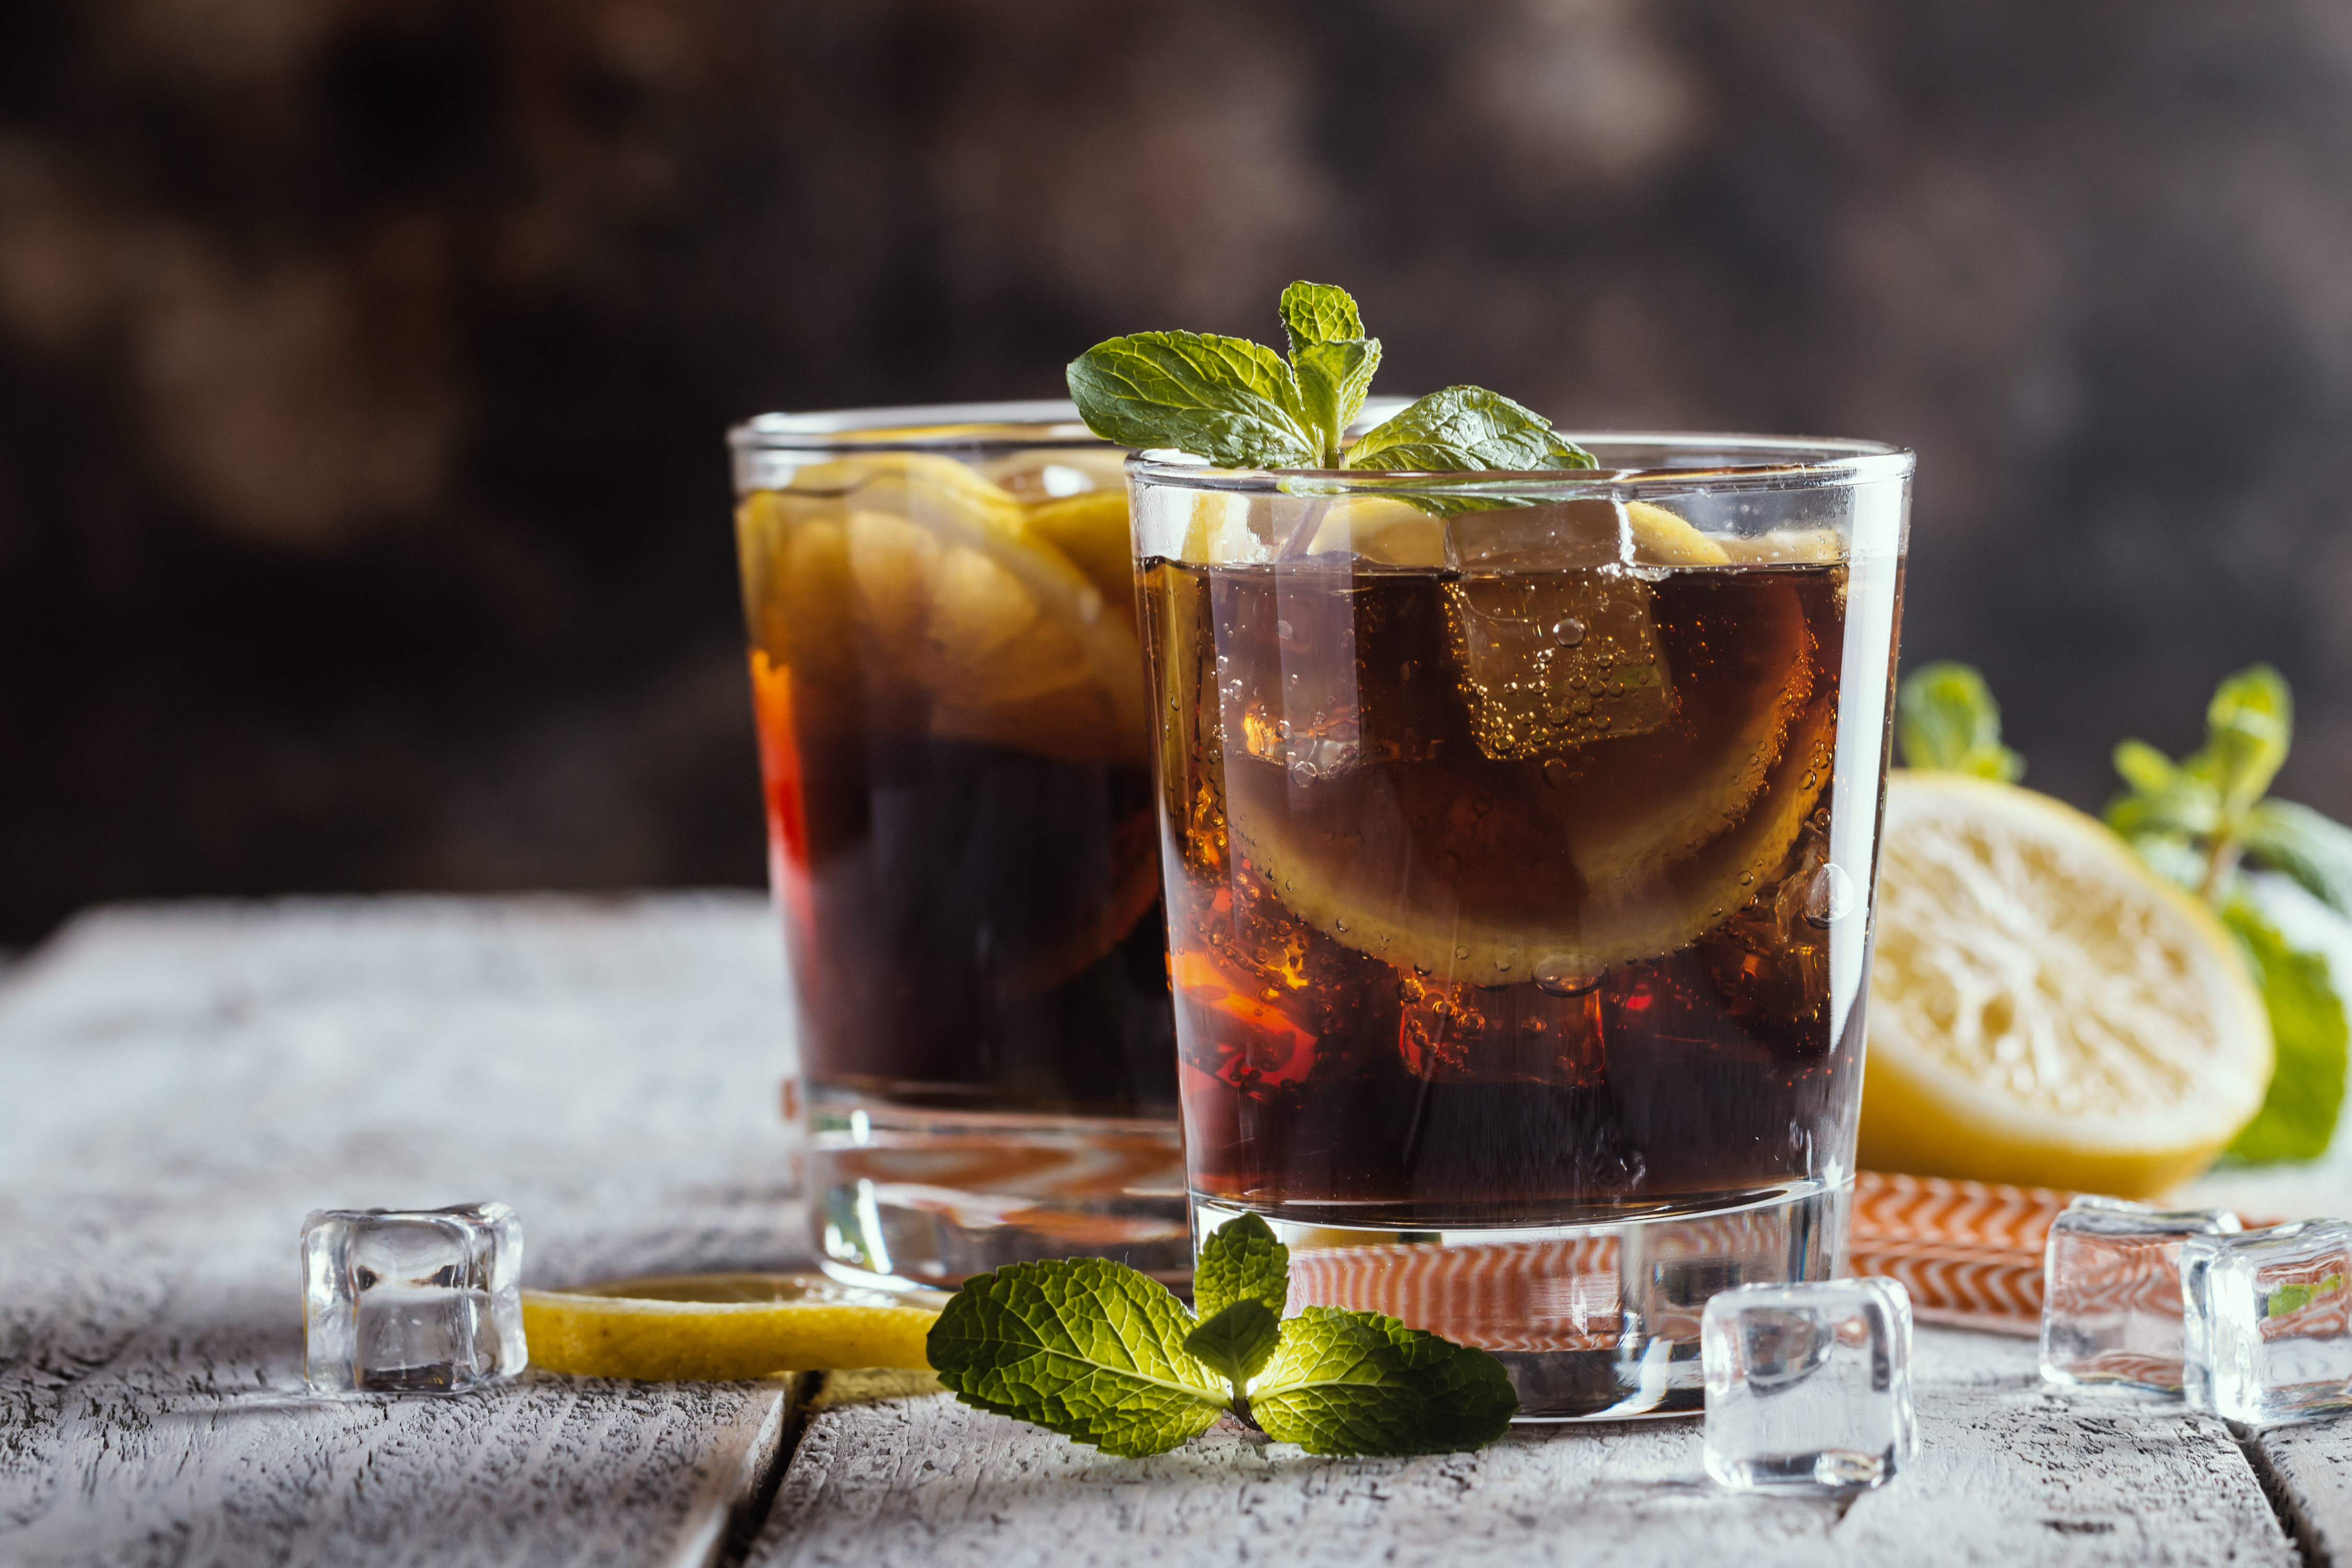 Mixing Fernet with Cola Helps Cut Its Bitterness